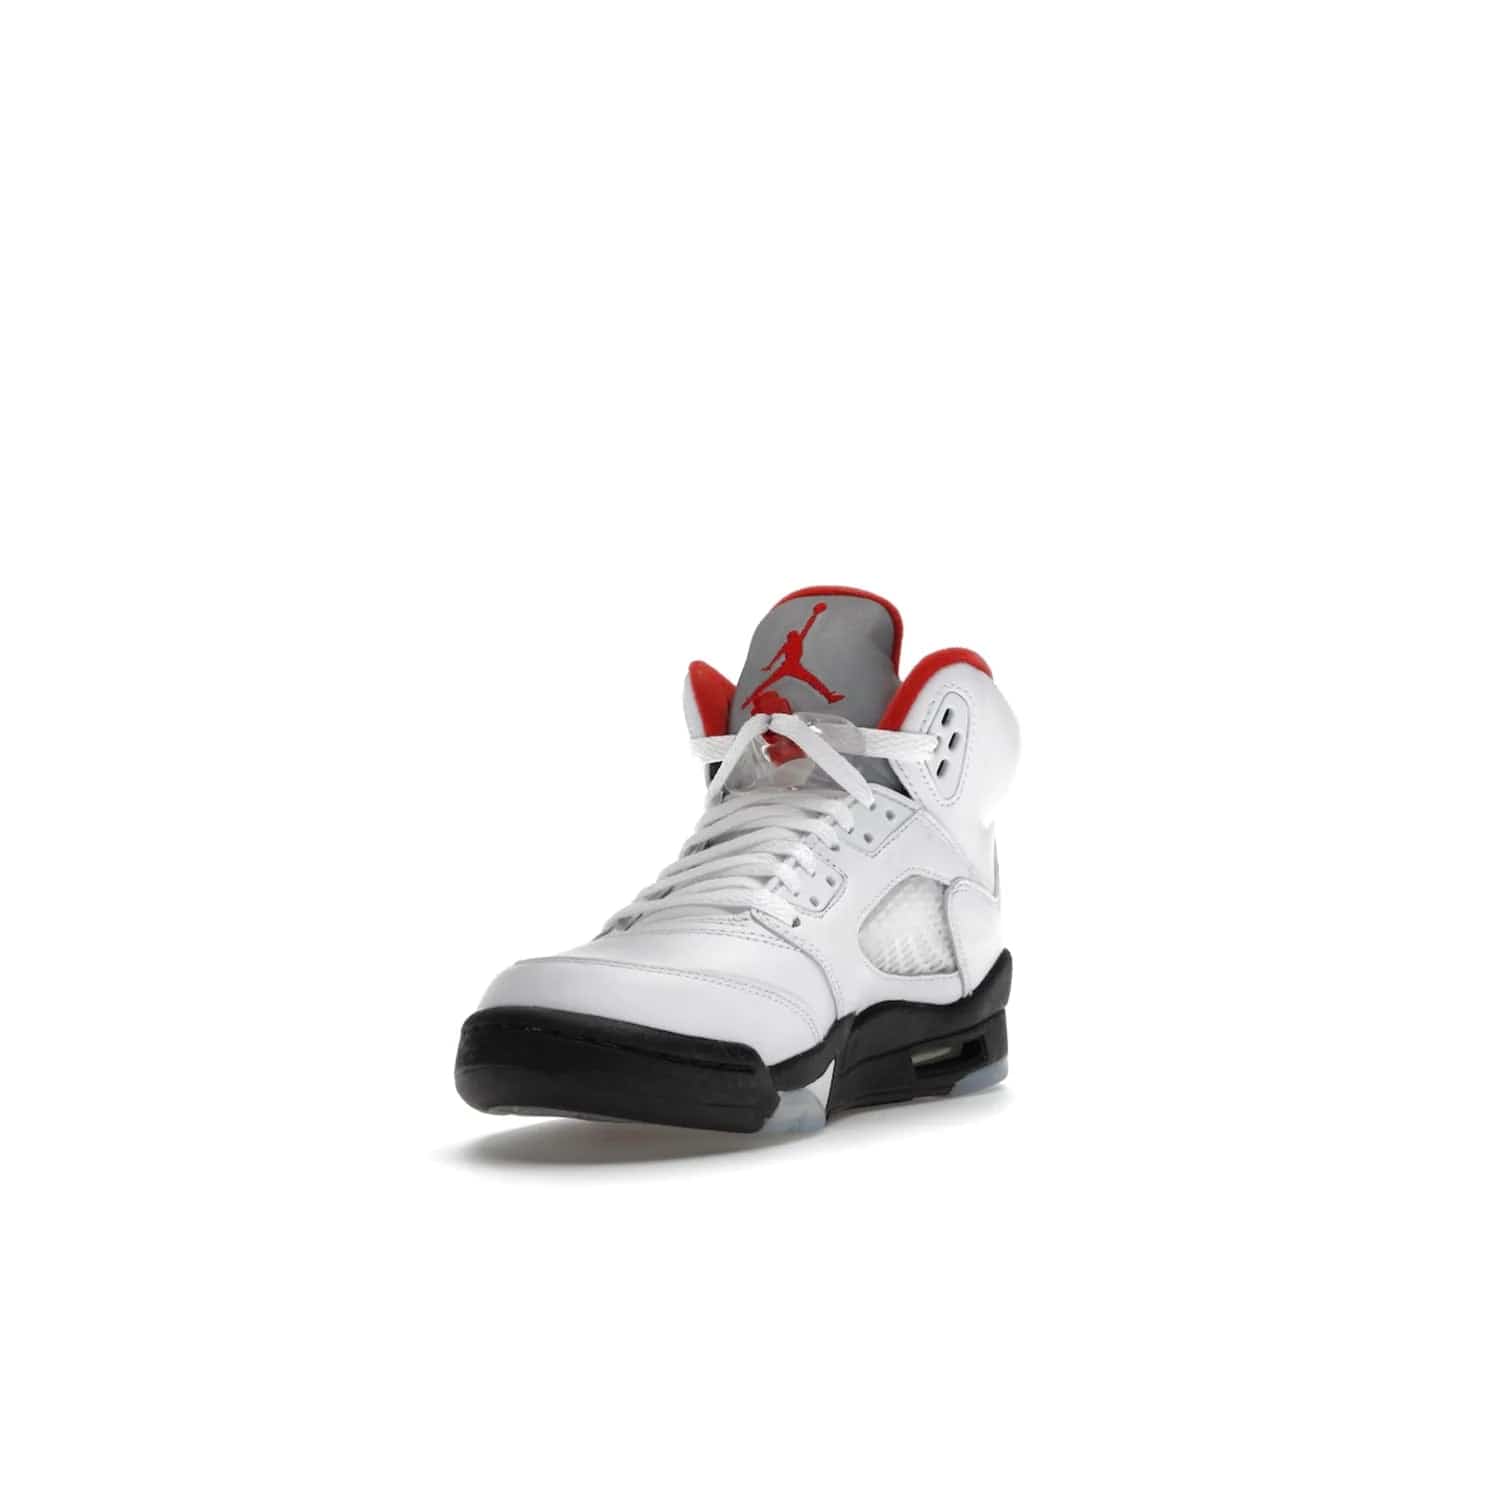 Jordan 5 Retro Fire Red Silver Tongue (2020) (GS) - Image 13 - Only at www.BallersClubKickz.com - A stylish option for any grade schooler. The Air Jordan 5 Retro Fire Red Silver Tongue 2020 GS features a combination of four hues, premium white leather, a clear mesh mid-upper and a reflective silver tongue. An icy translucent blue outsole completes the look. Available on May 2, $150.